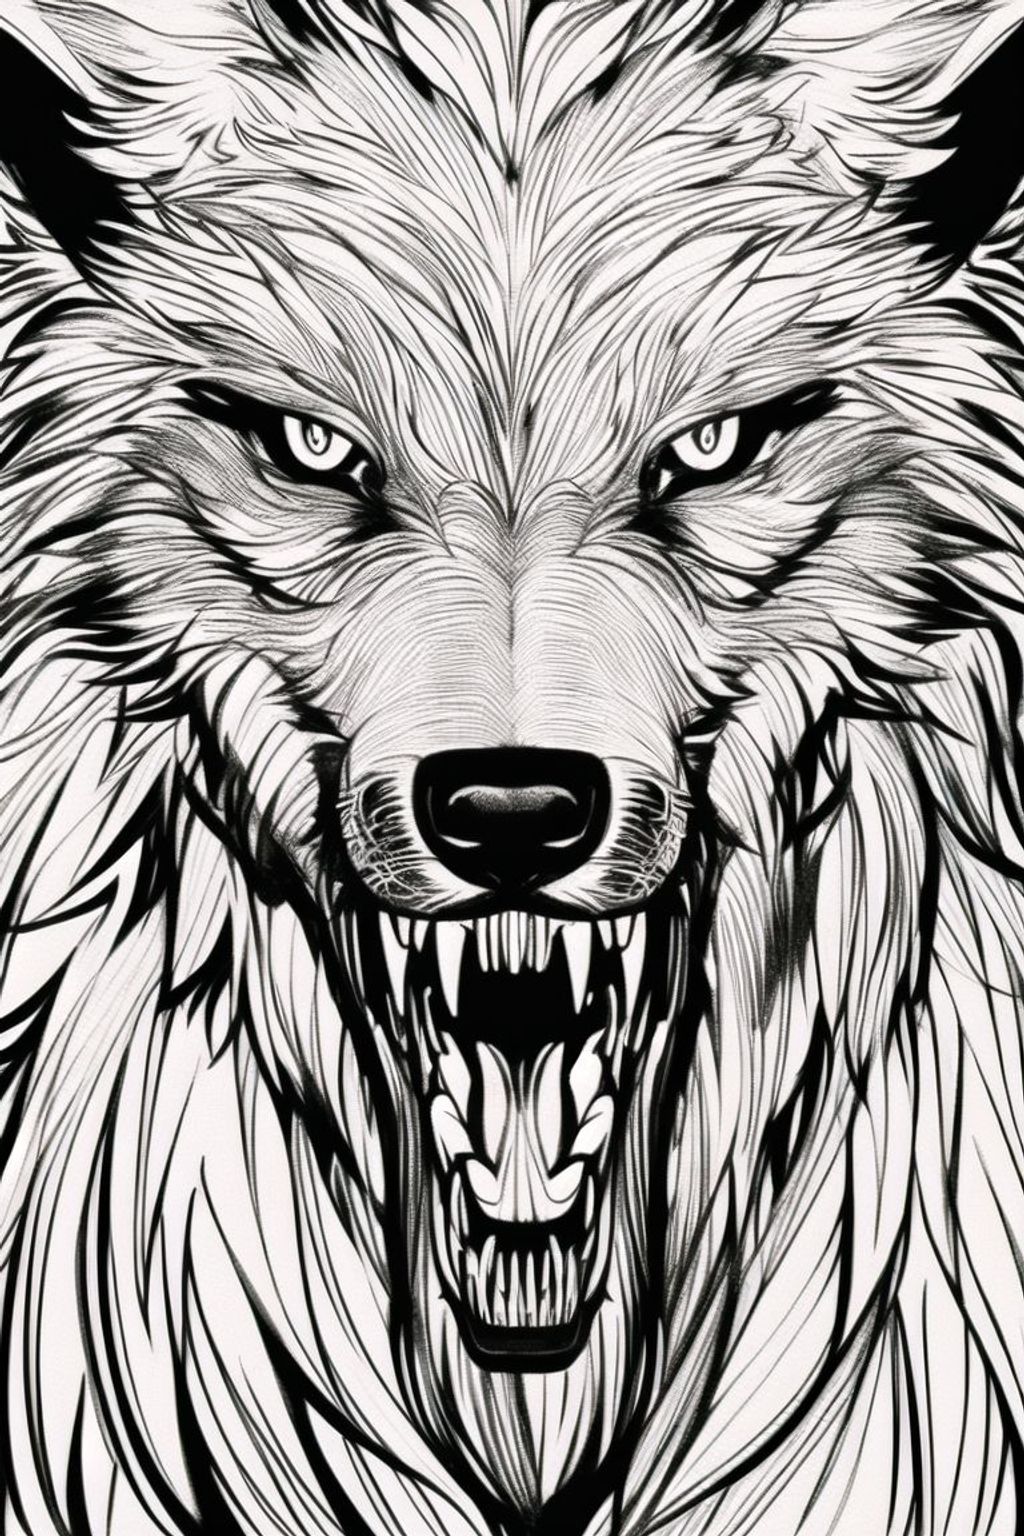 angry wolf face outline